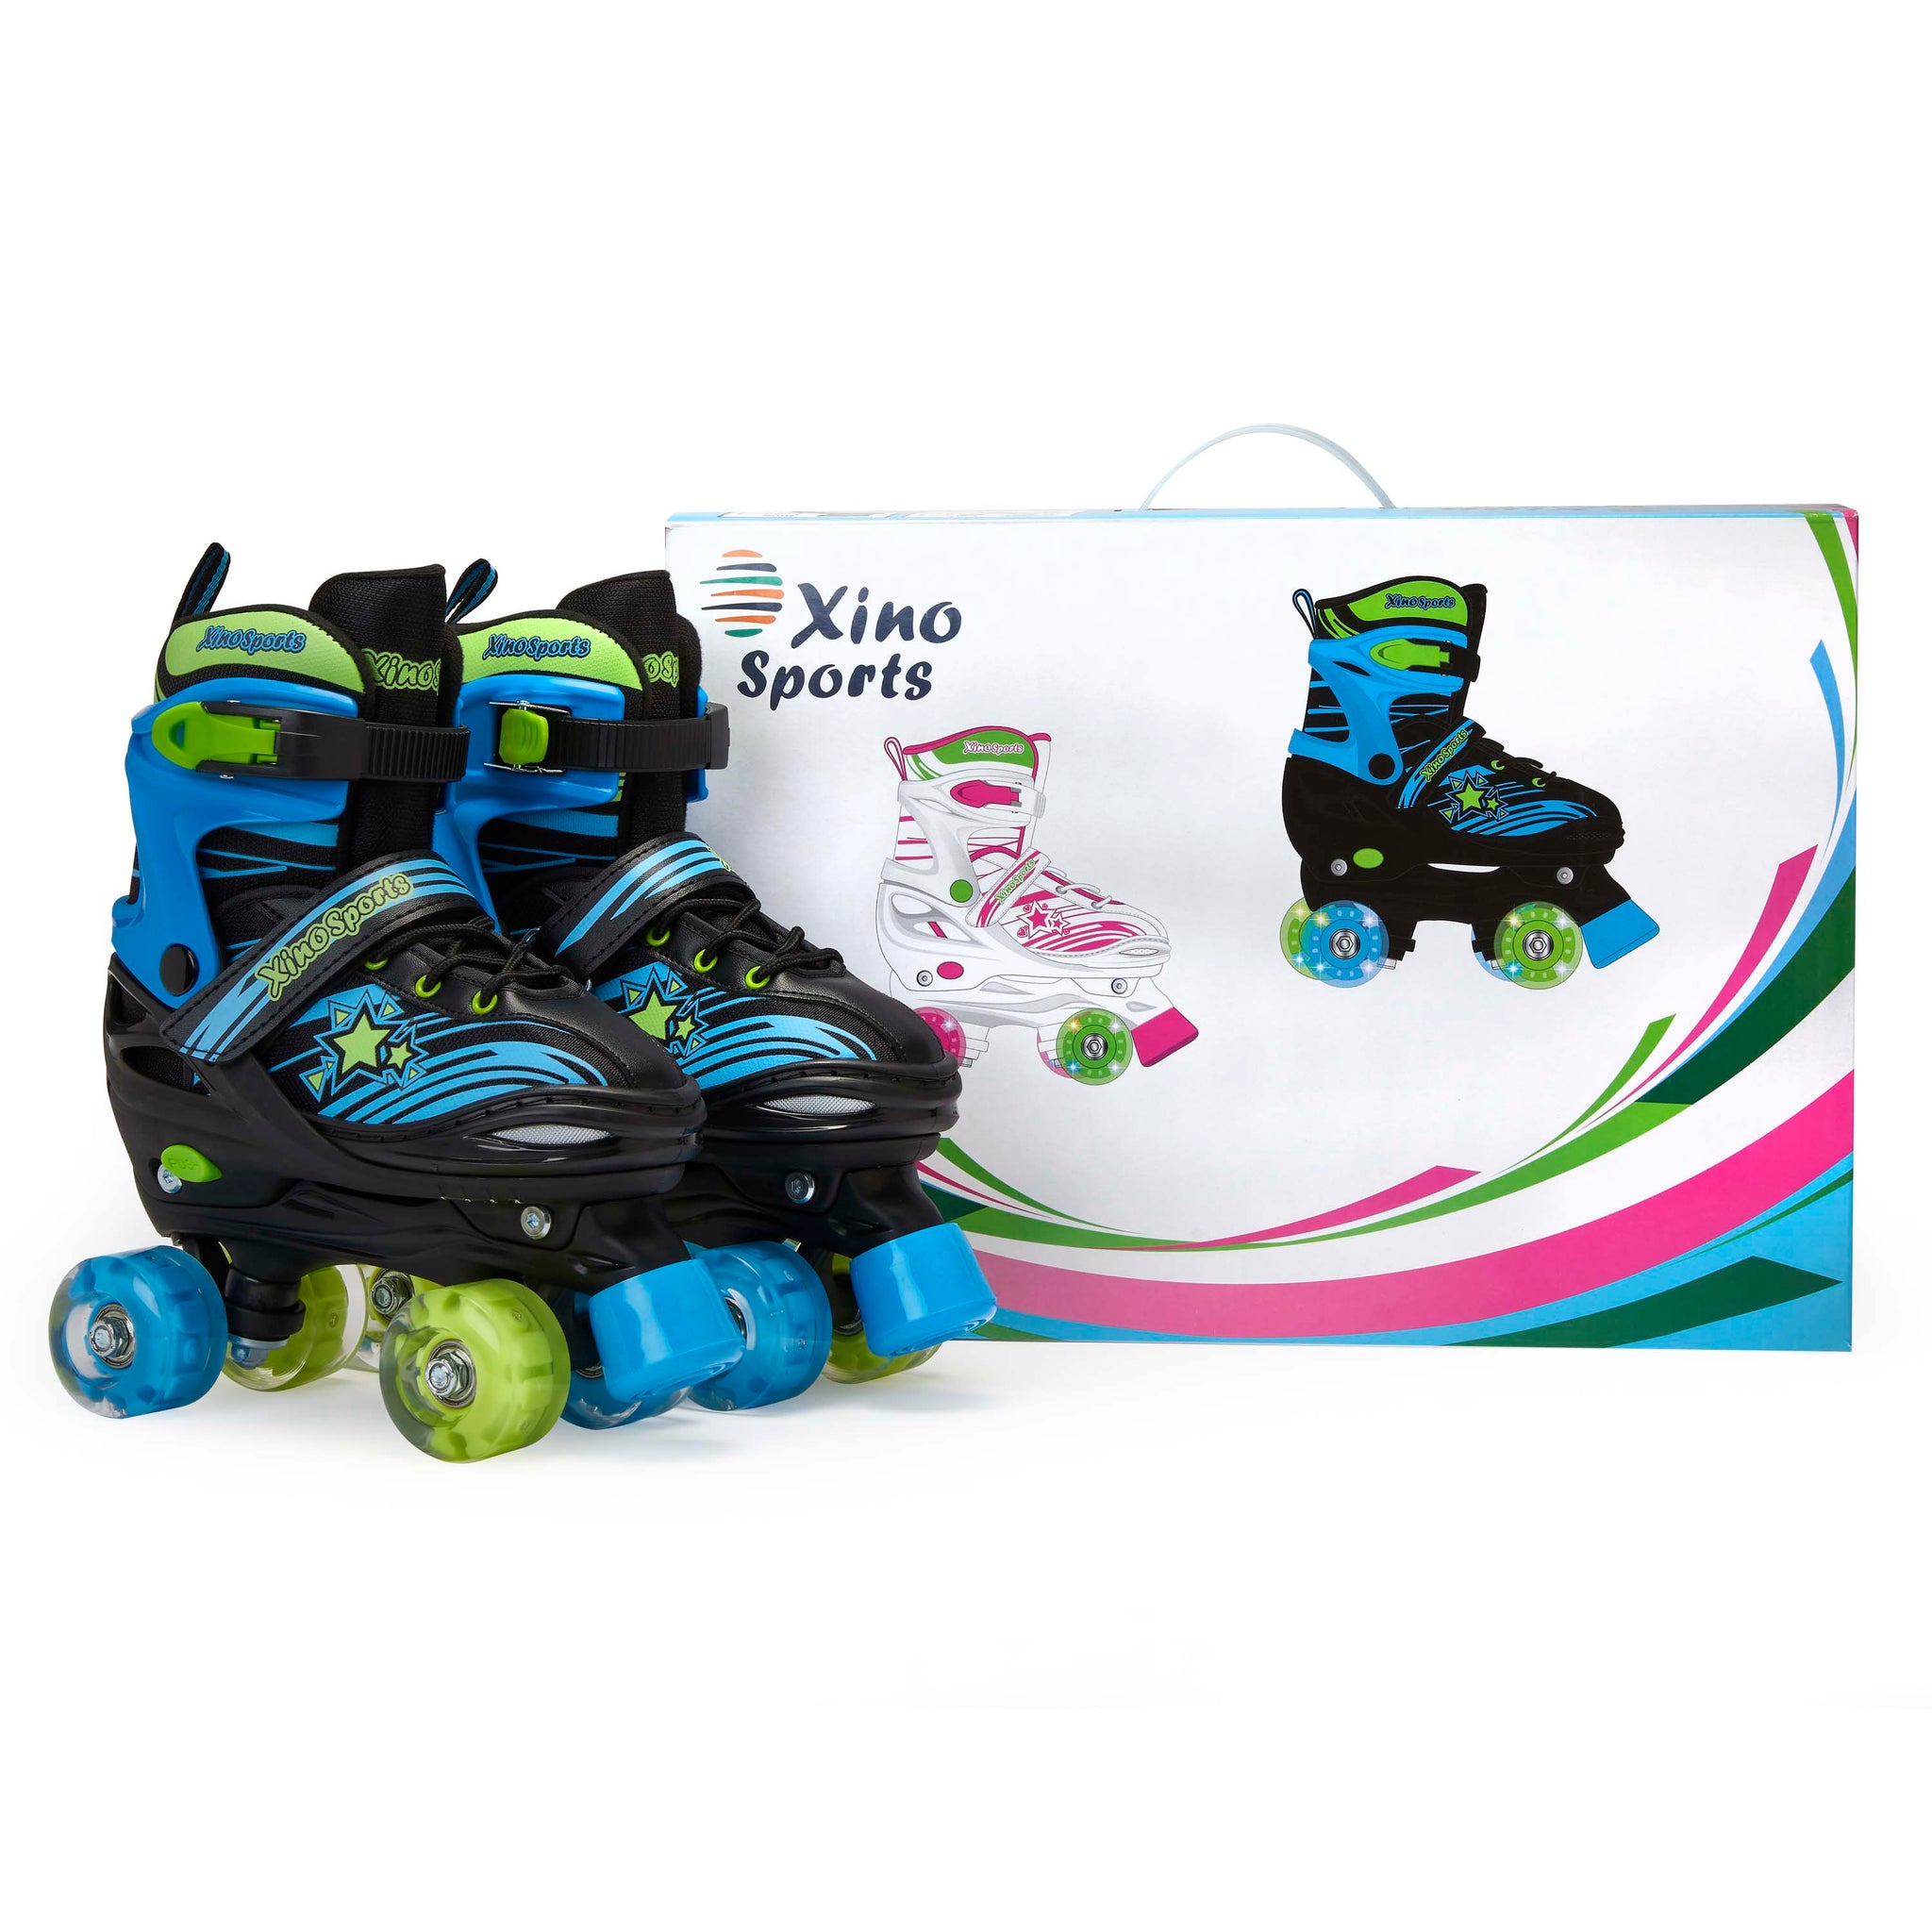 Roller Skating Accessories, Equipment and Supplies